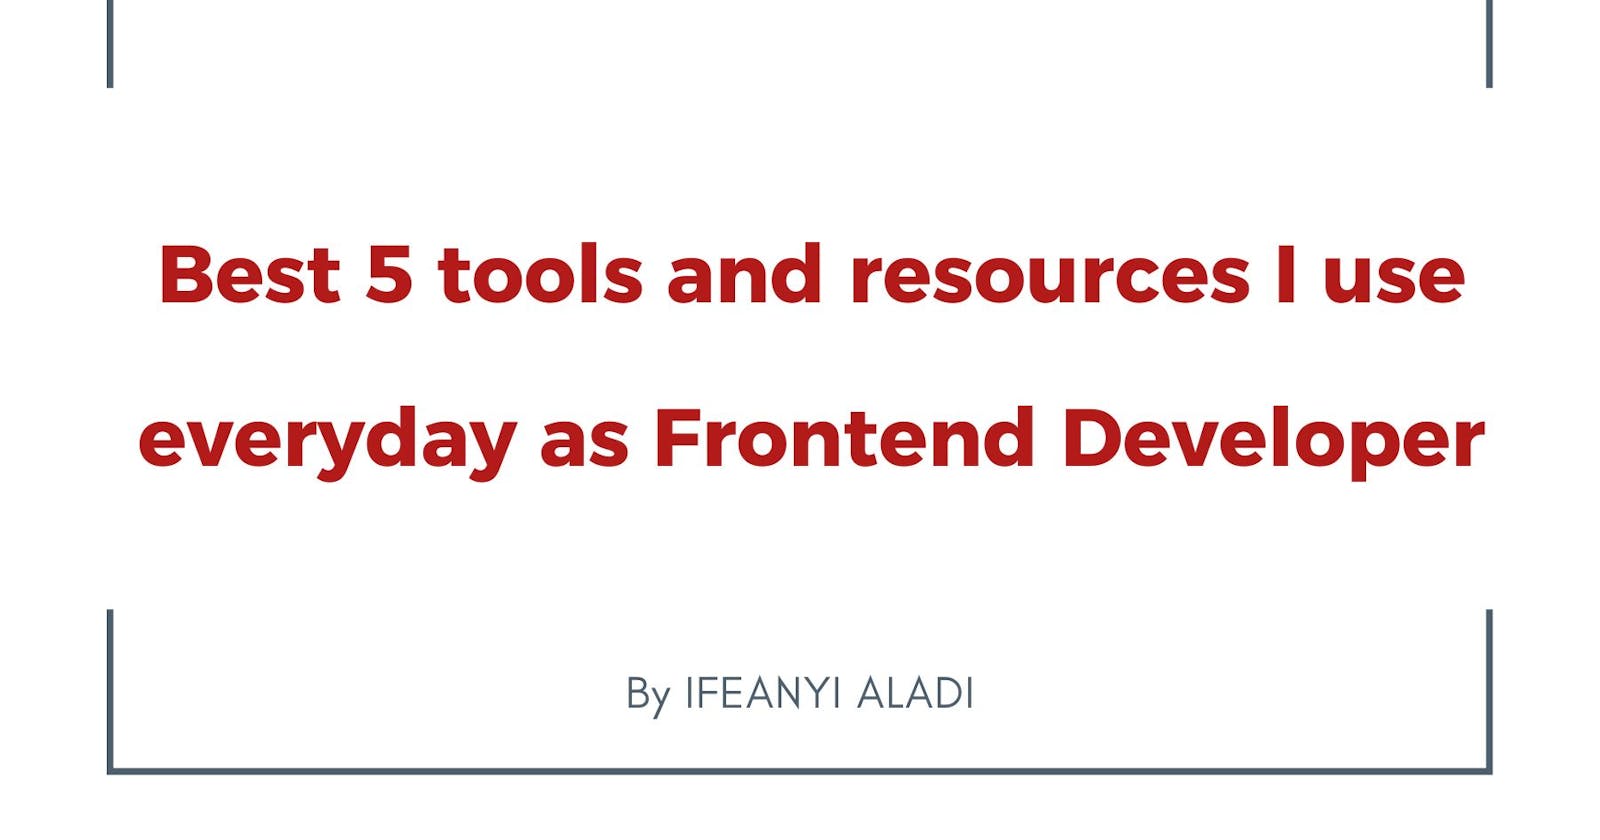 Best 5 tools and resources I use everyday as Frontend Developer